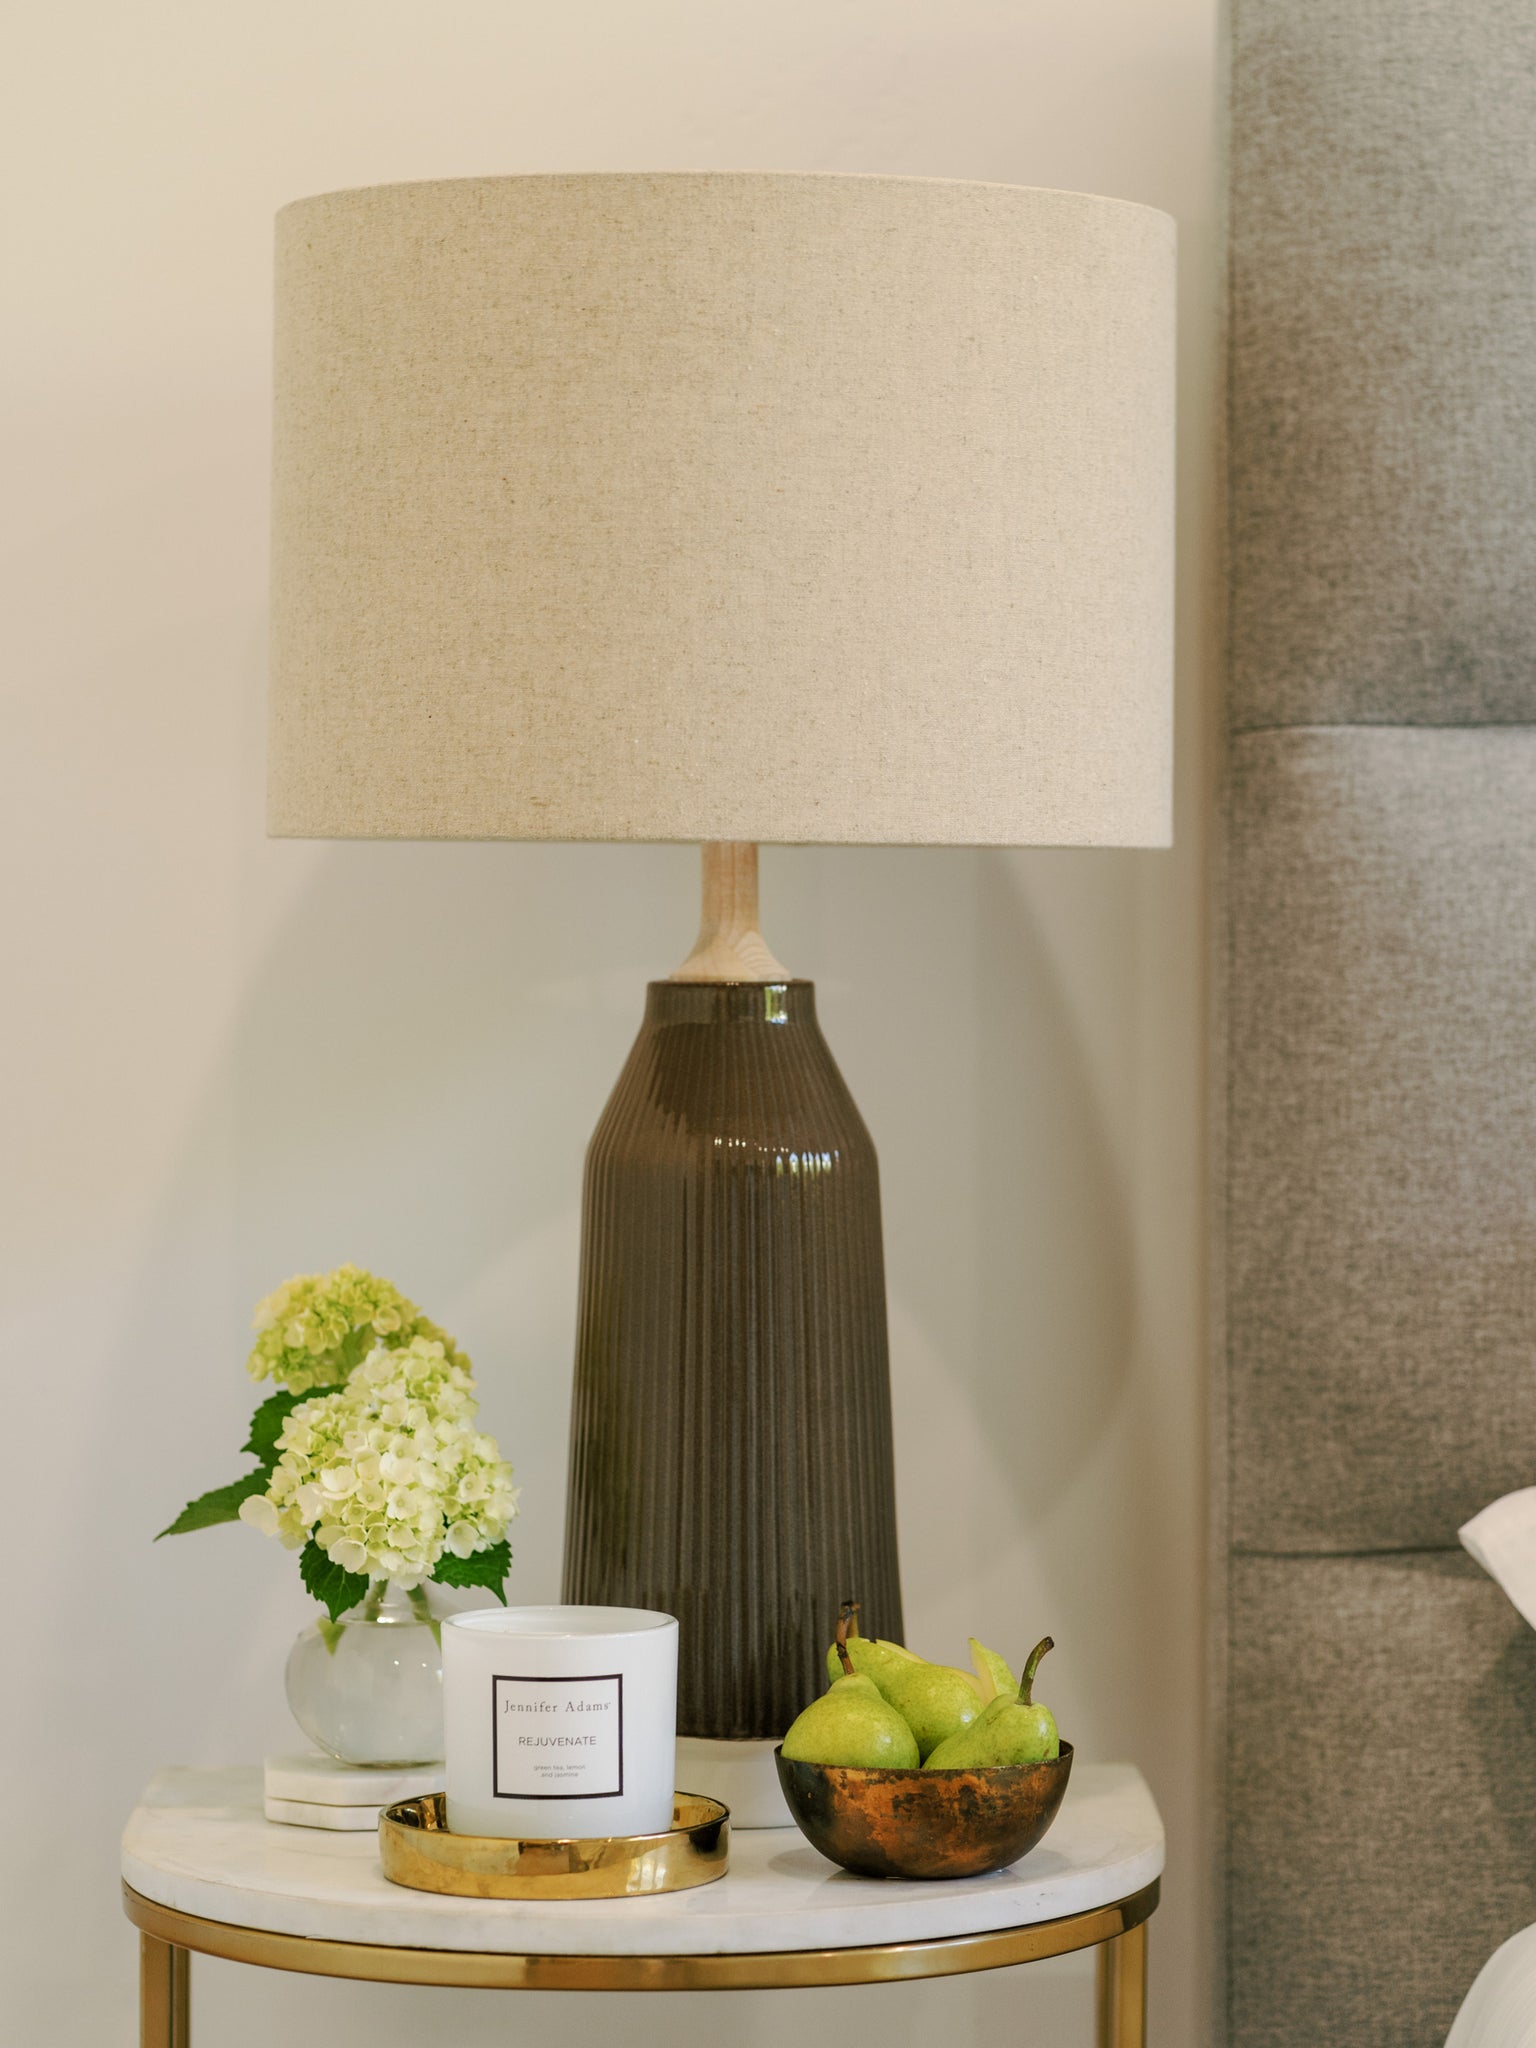 Bedside lamps add a warm glow that adds to the hotel-inspired ambiance